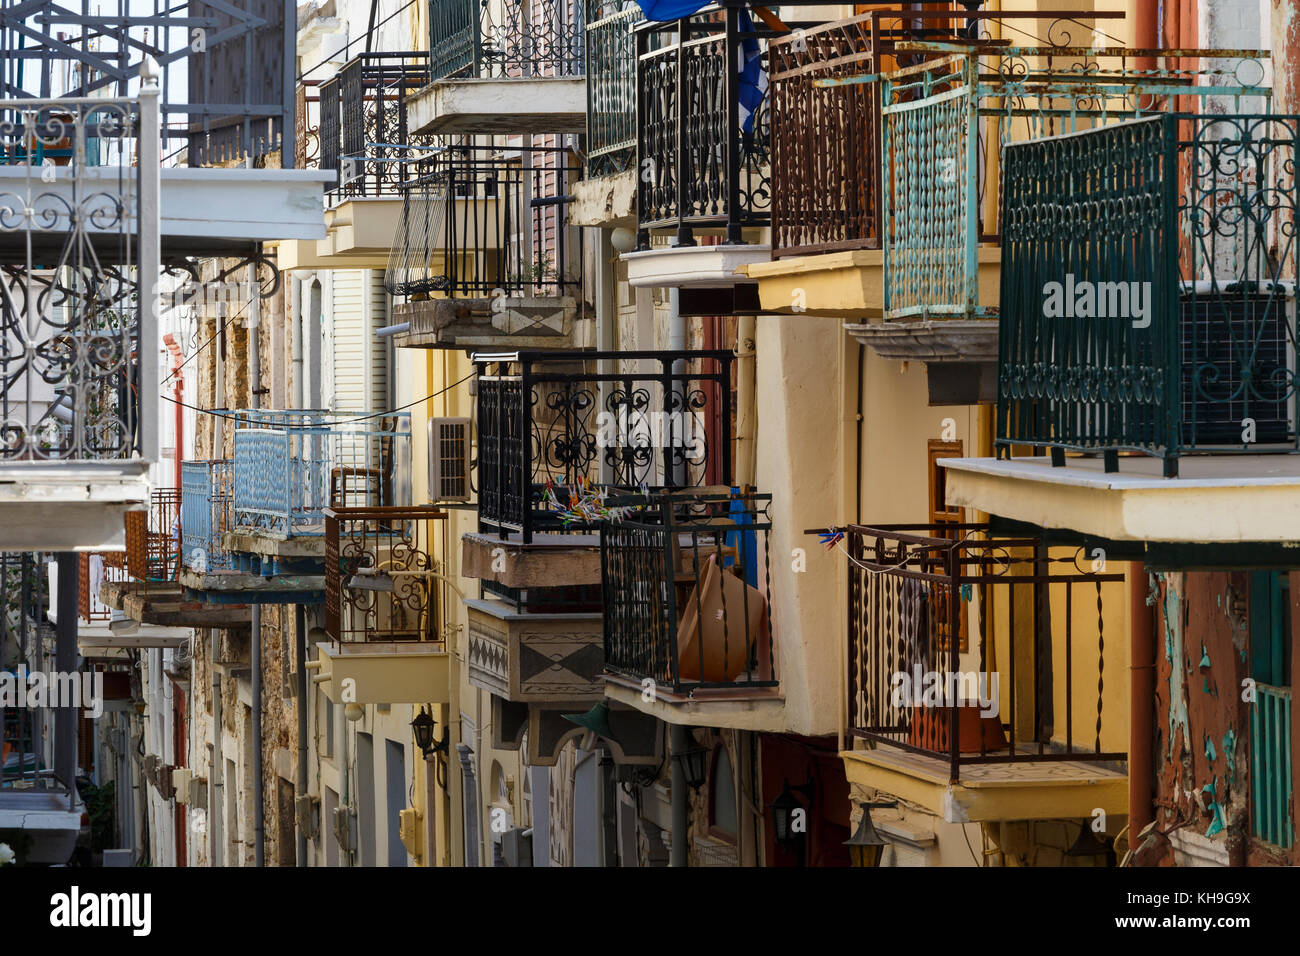 Balconies on the facades of houses in Pyrgi village on Chios island, Greece. Stock Photo